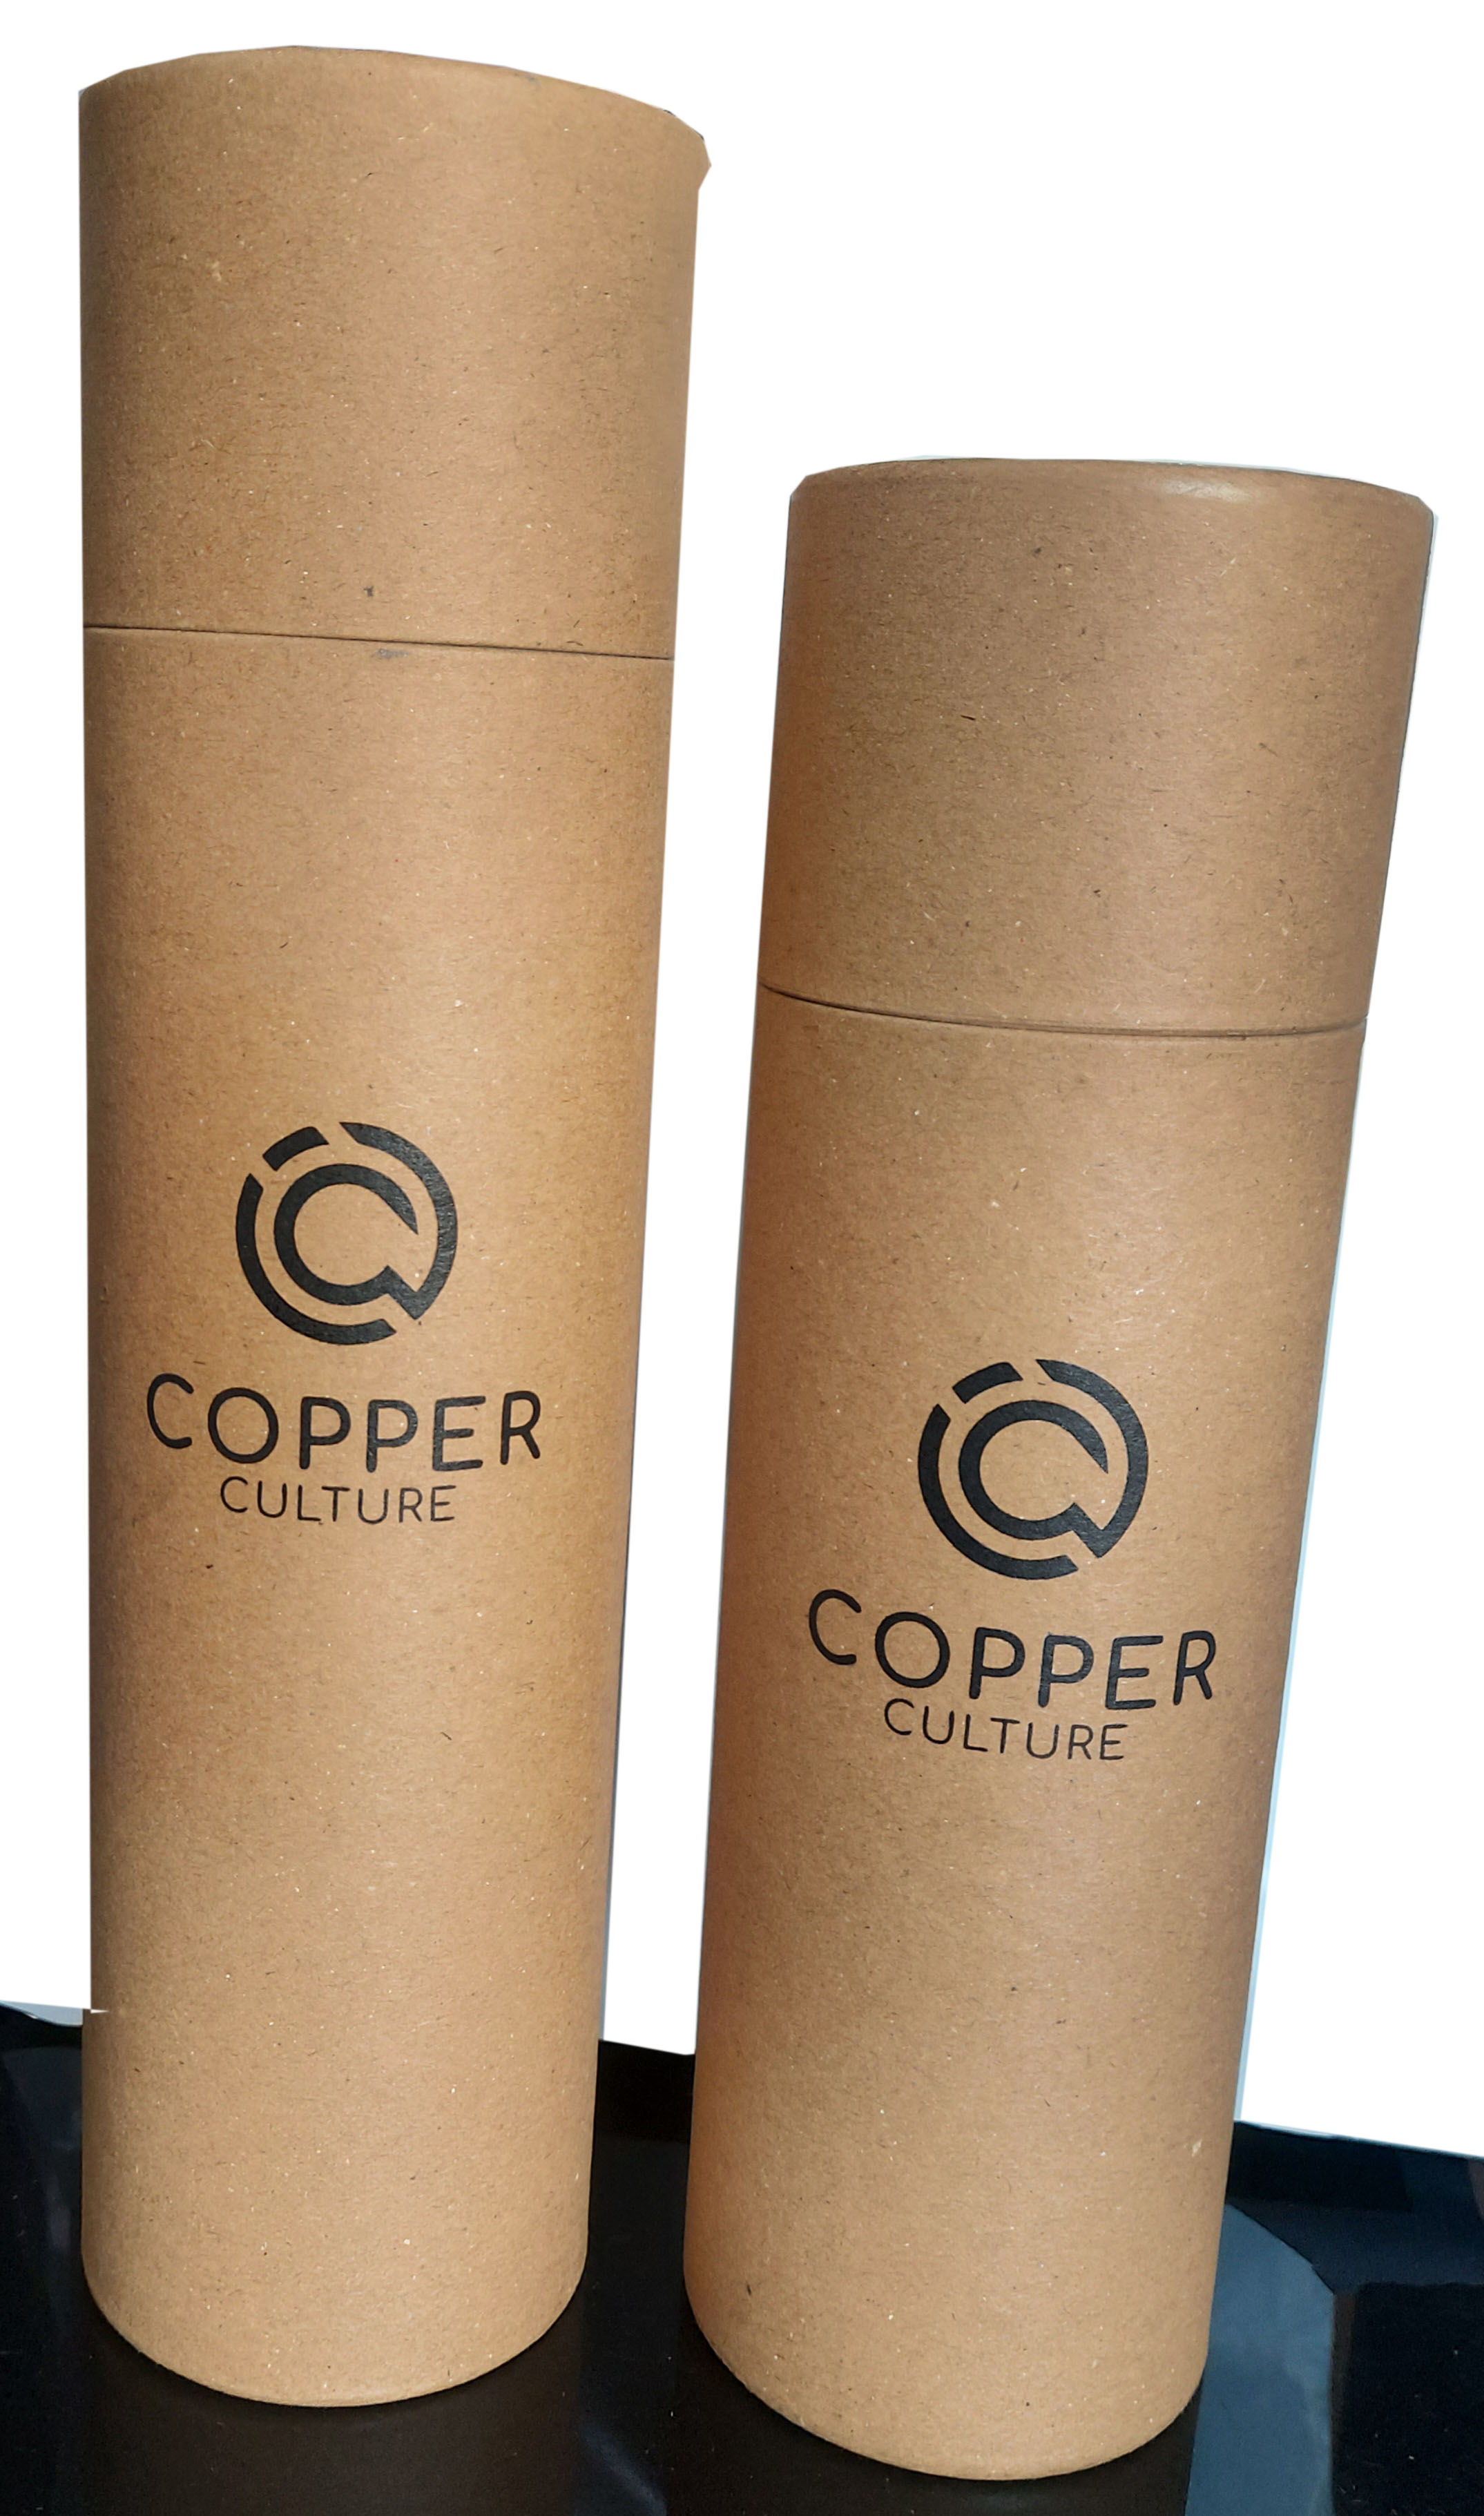 Plain round all paper canisters